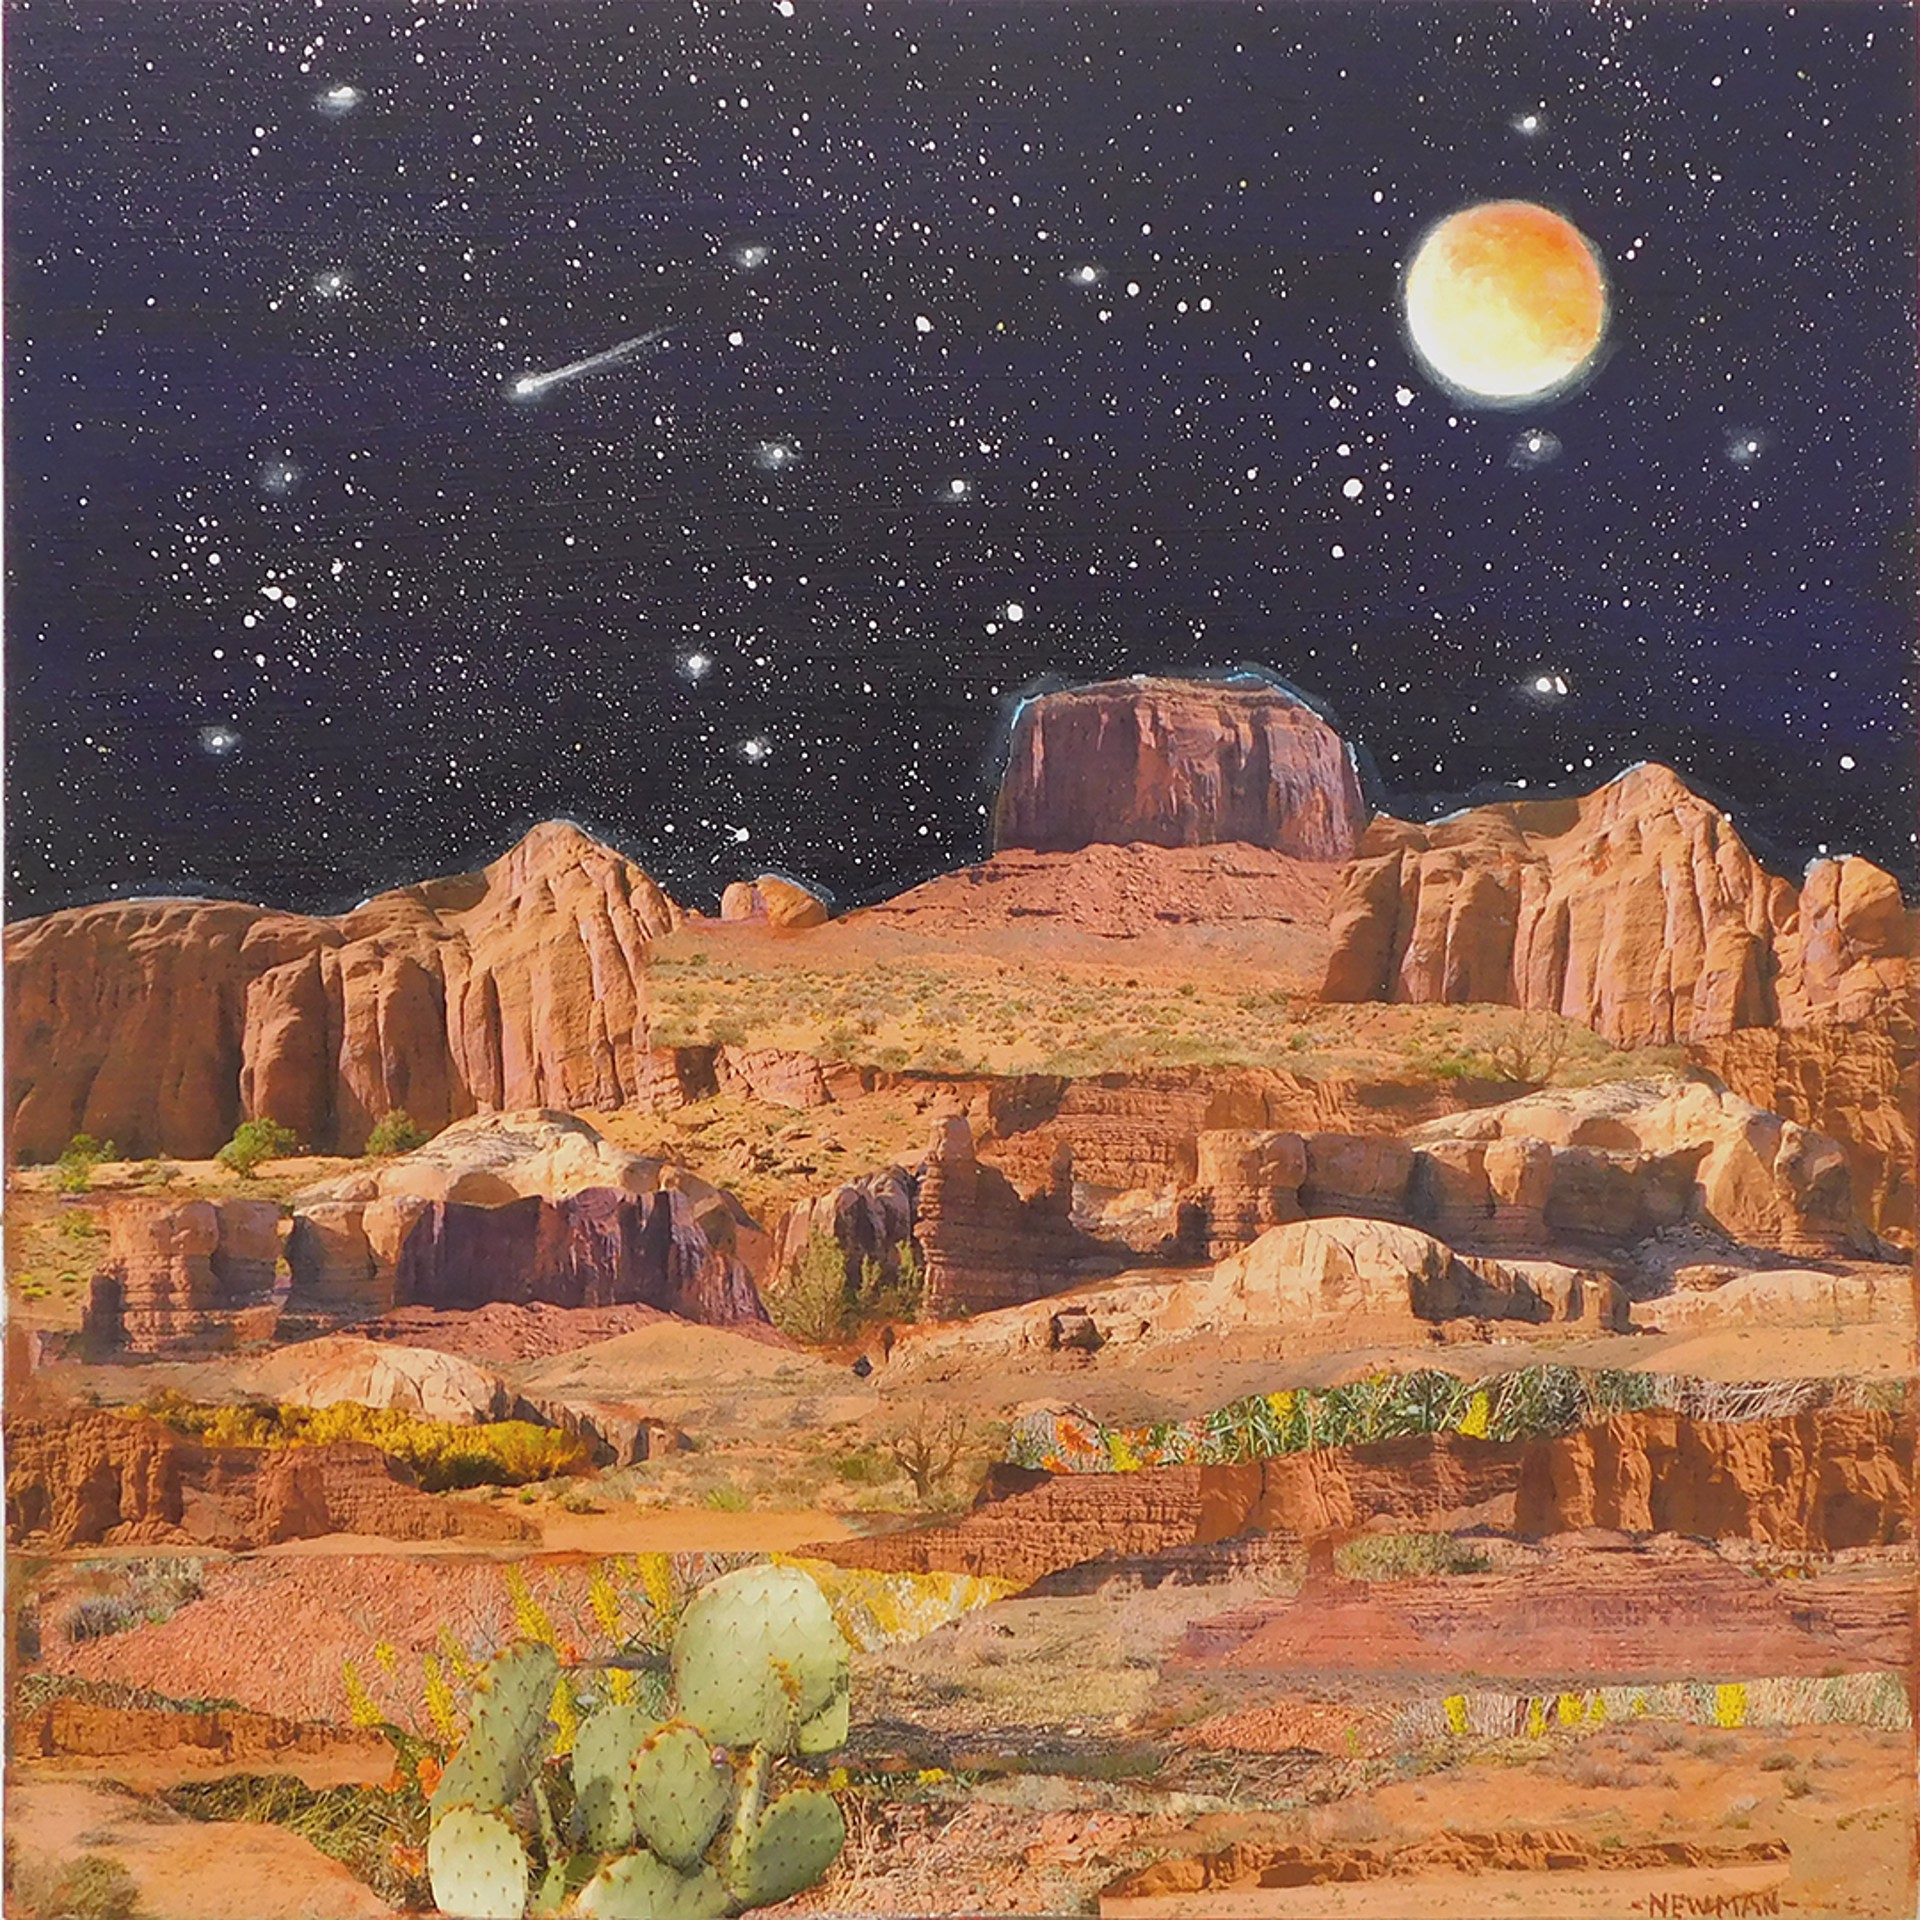 Moon Over Surreal Desert by Dave Newman